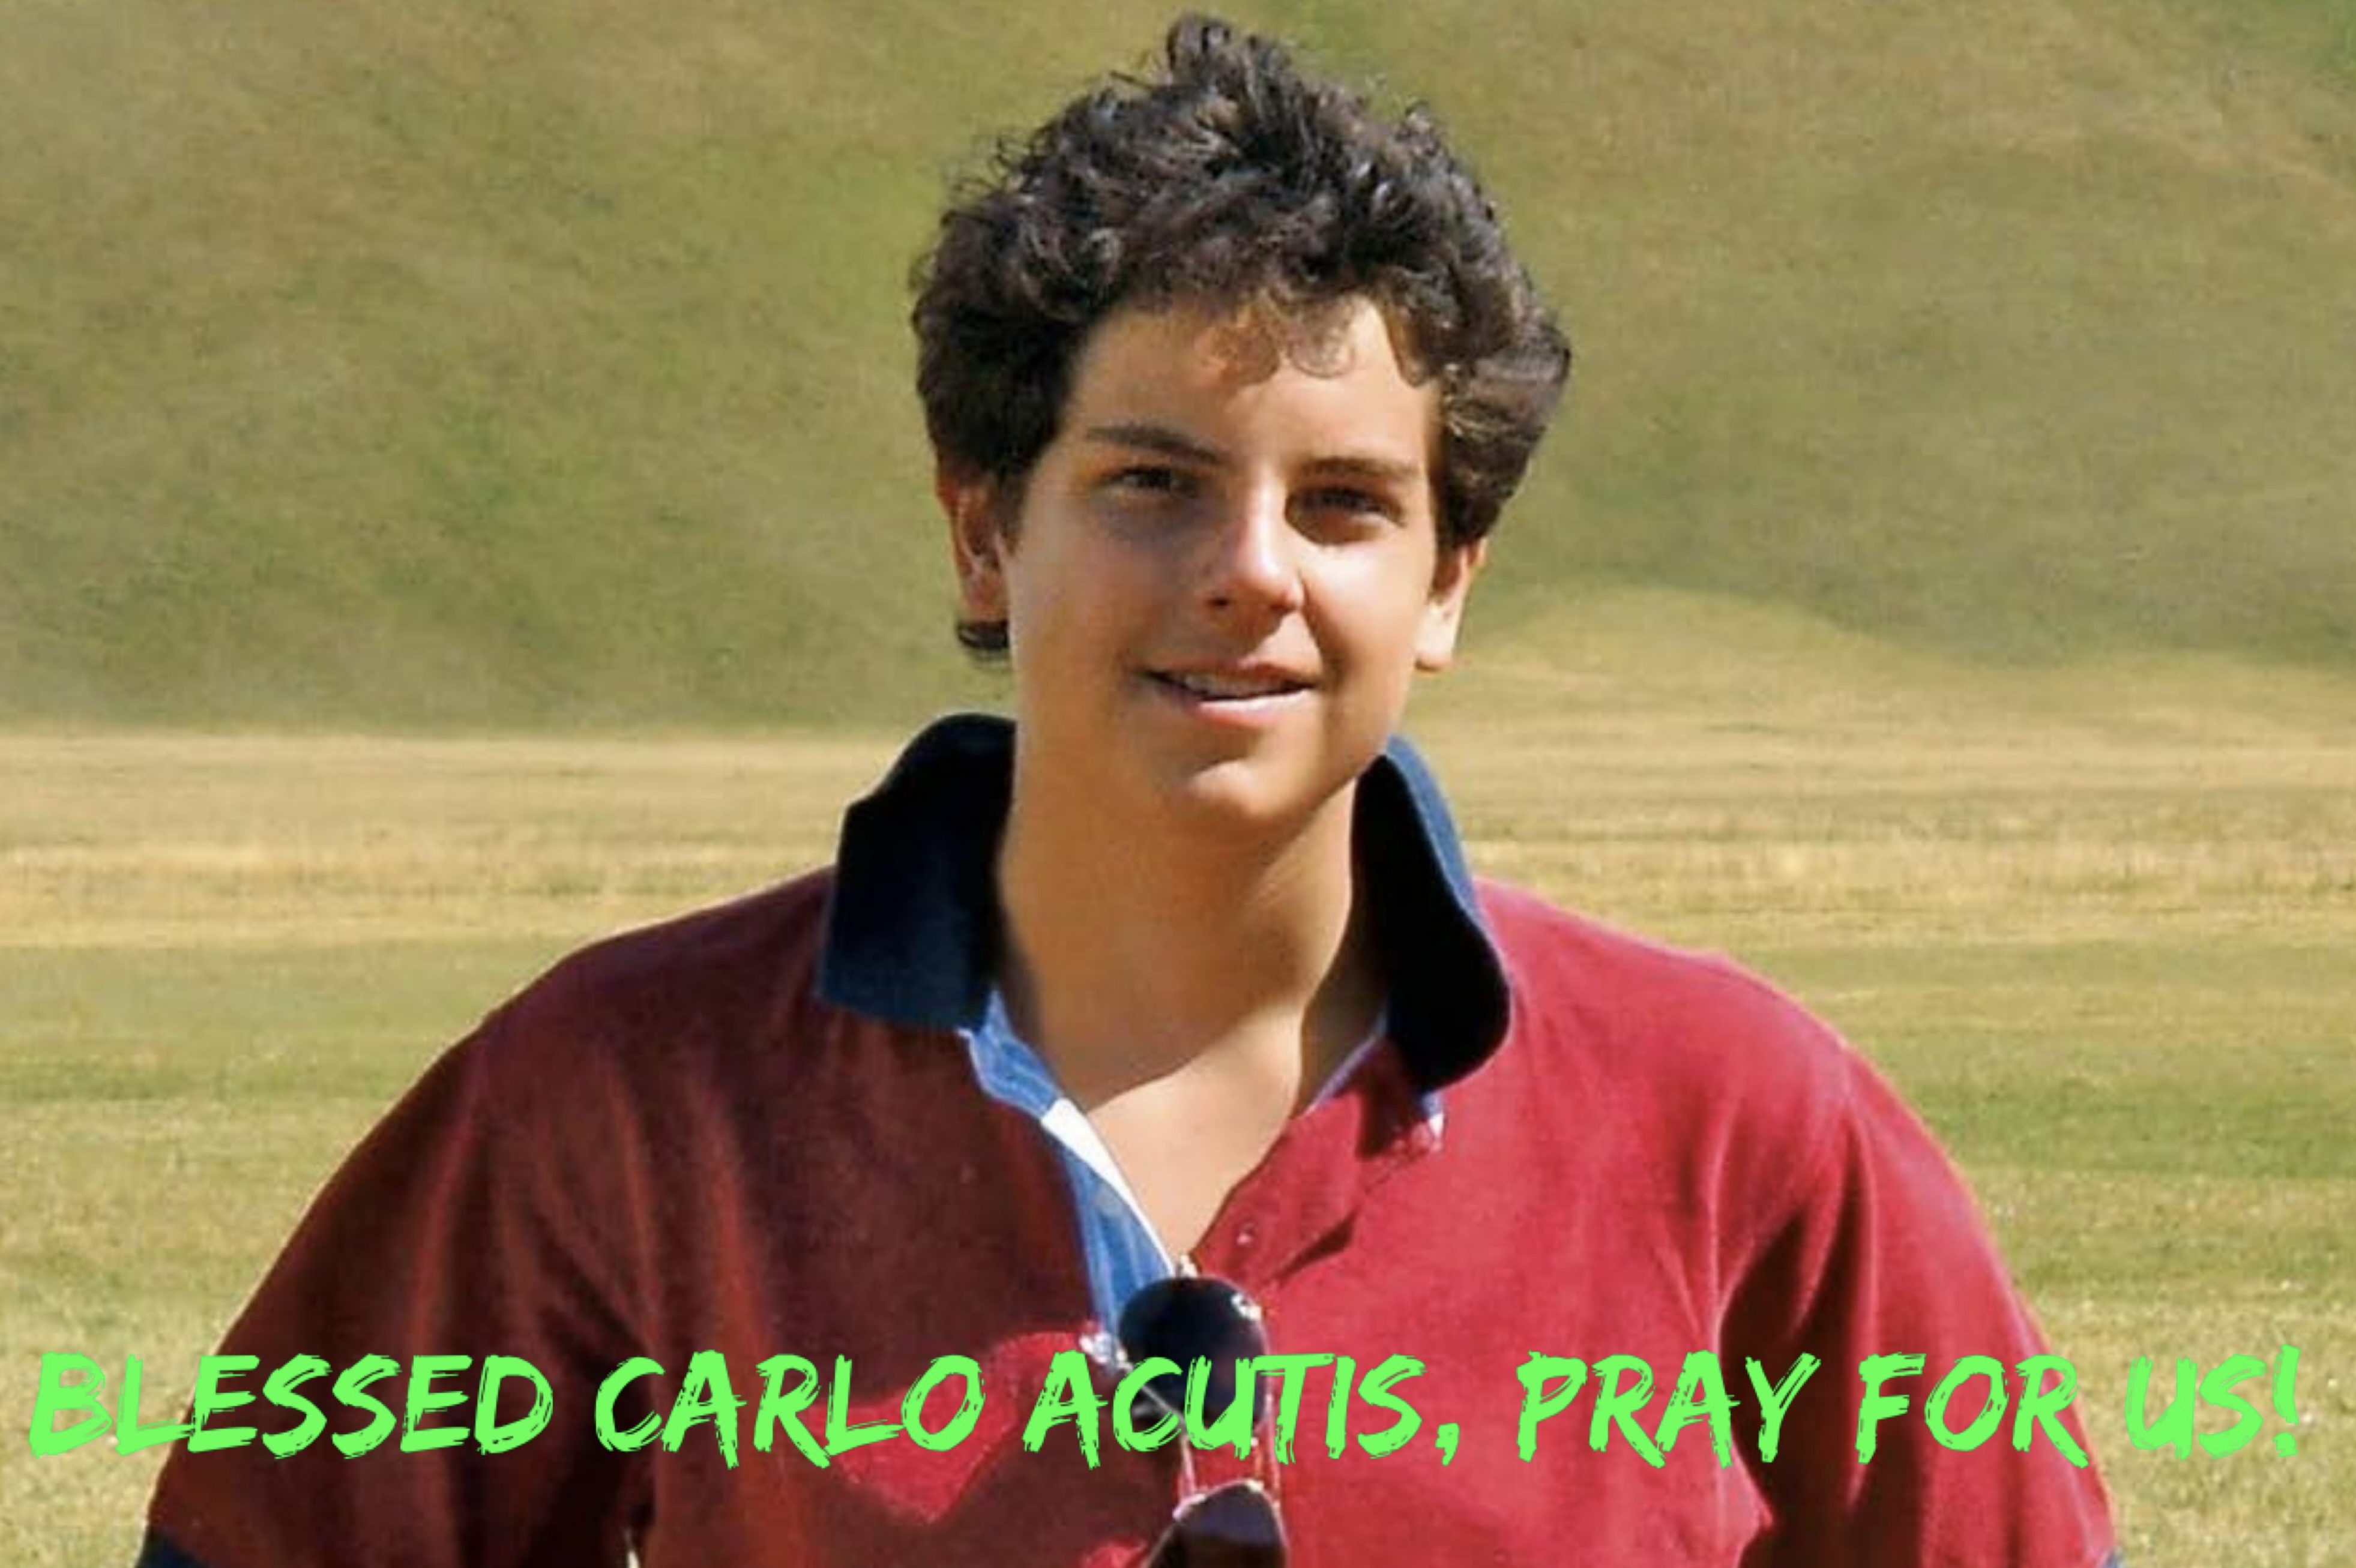 12th October - Blessed Carlo Acutis